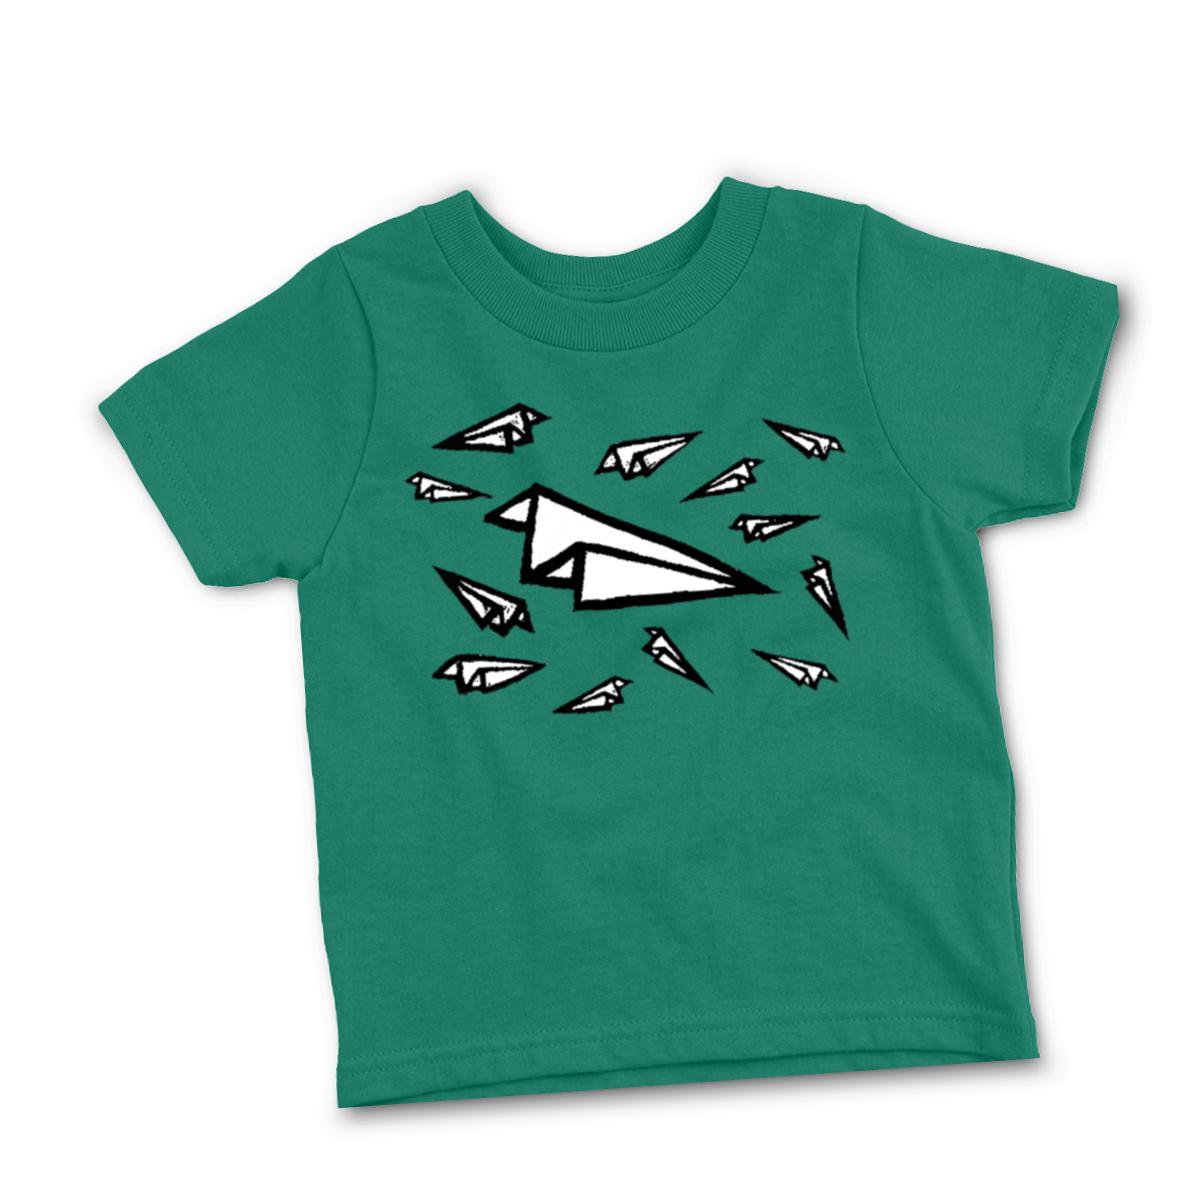 Airplane Frenzy Toddler Tee 2T kelly